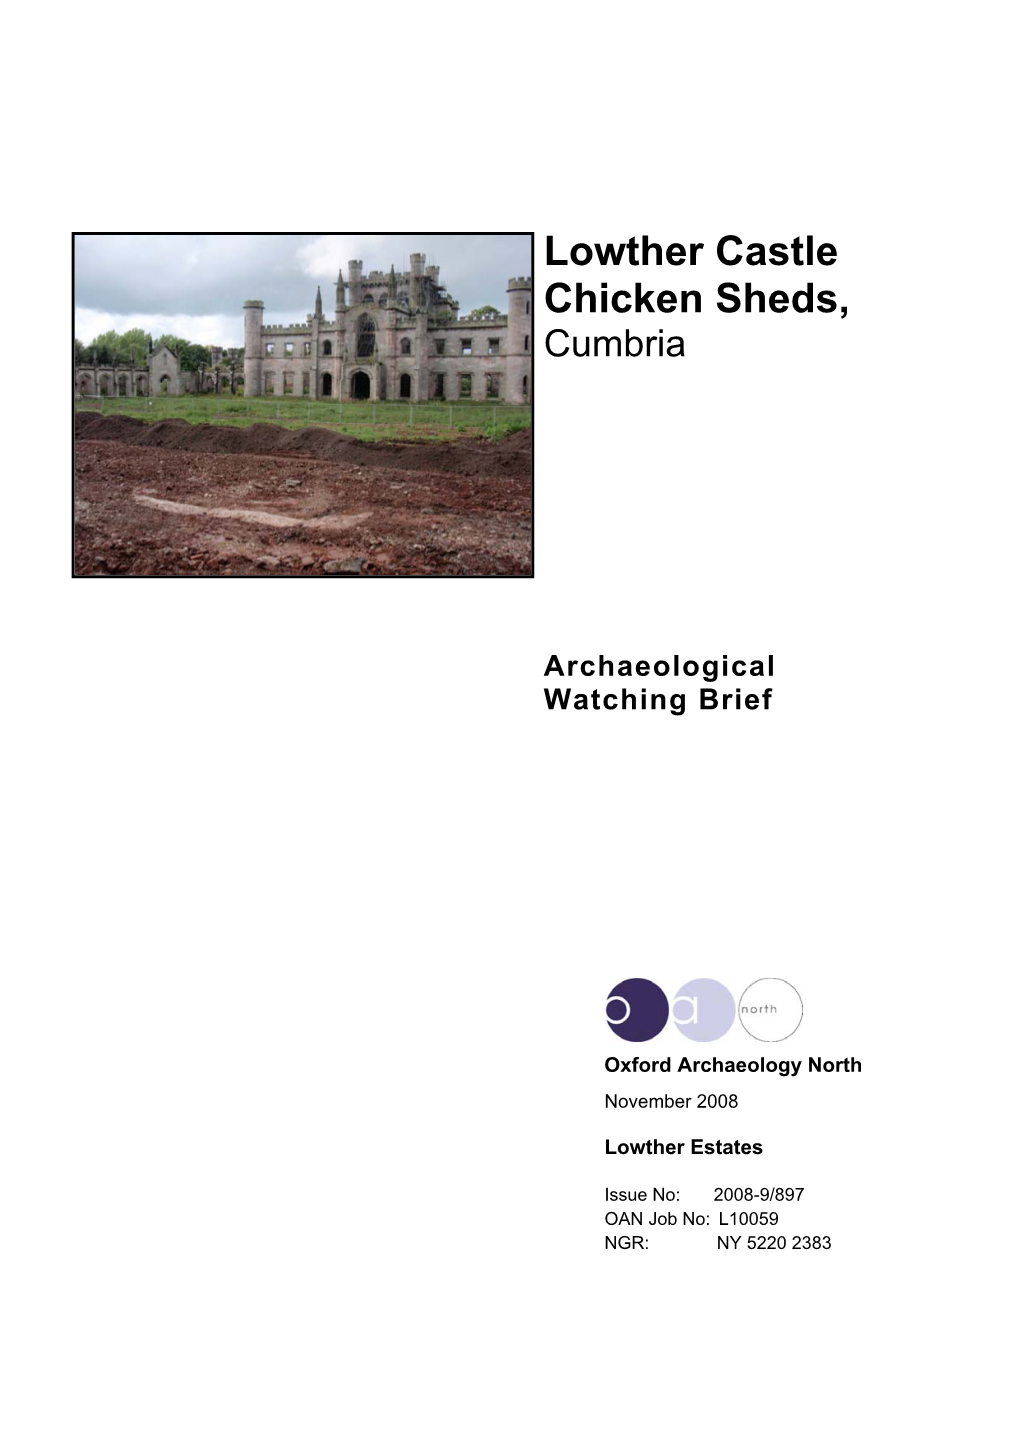 Lowther Castle Chicken Sheds, Cumbria